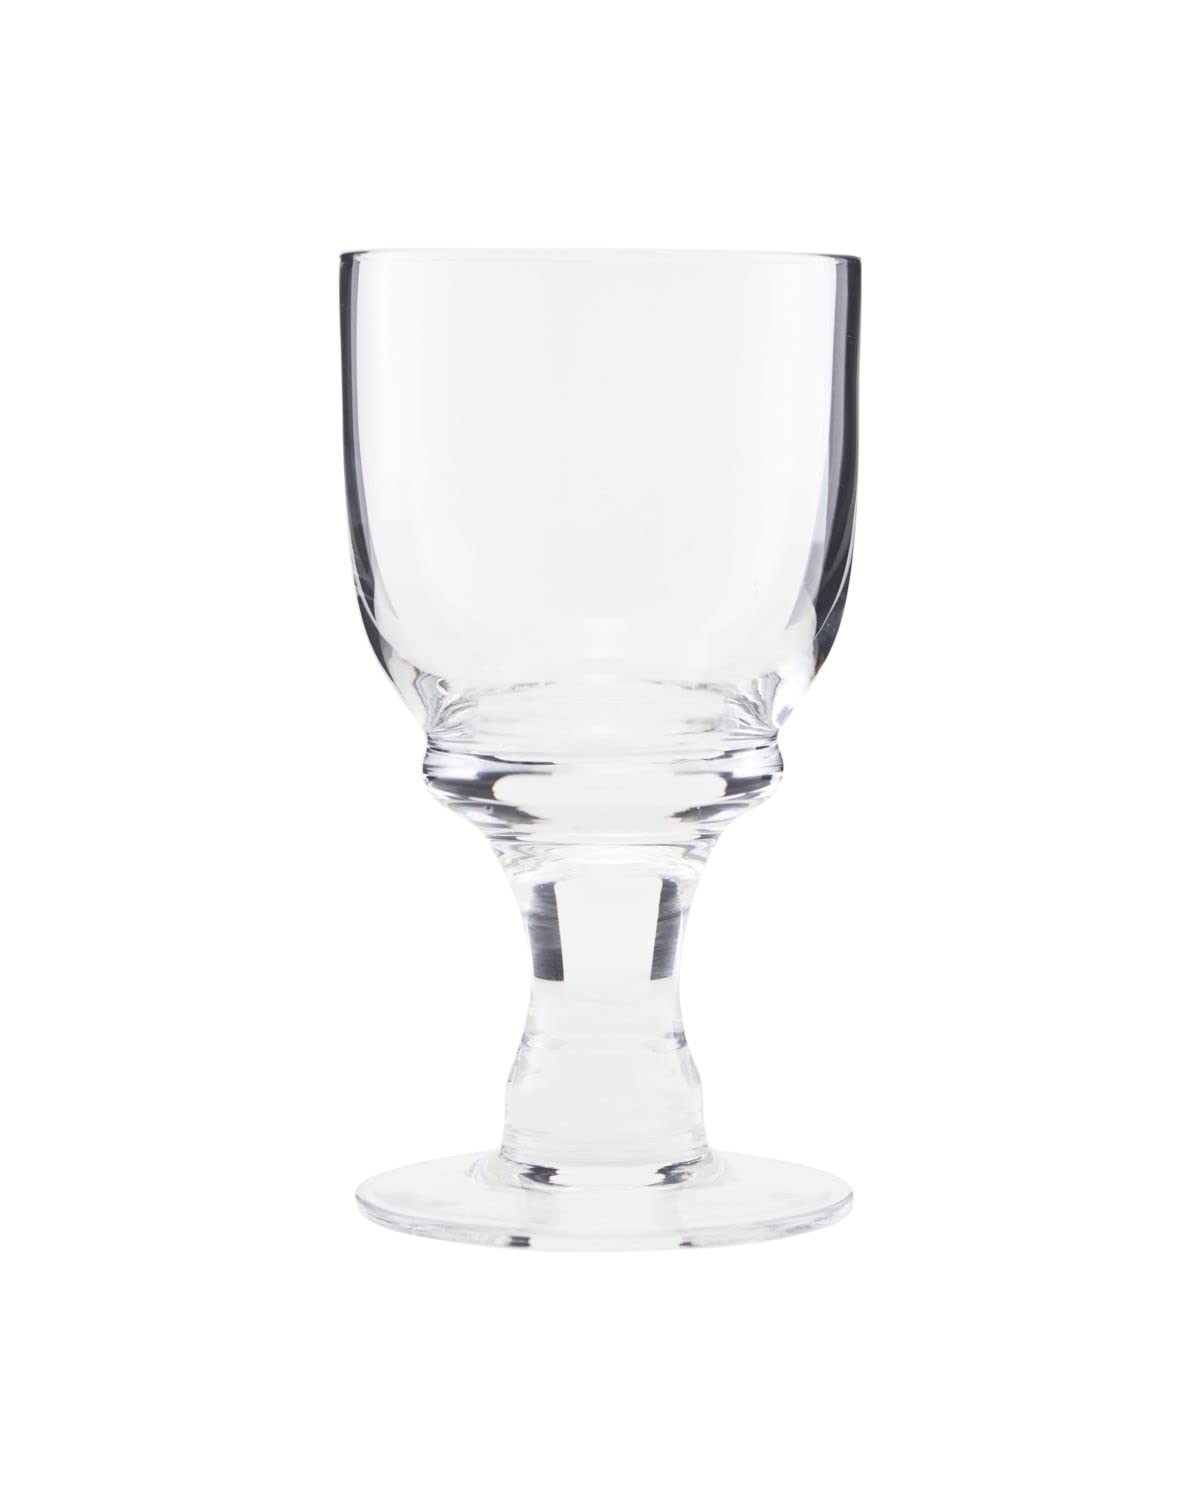 Boat Wine Glass Holders Turn Existing Cup Inserts into Stemware Holders -  My Boat Life